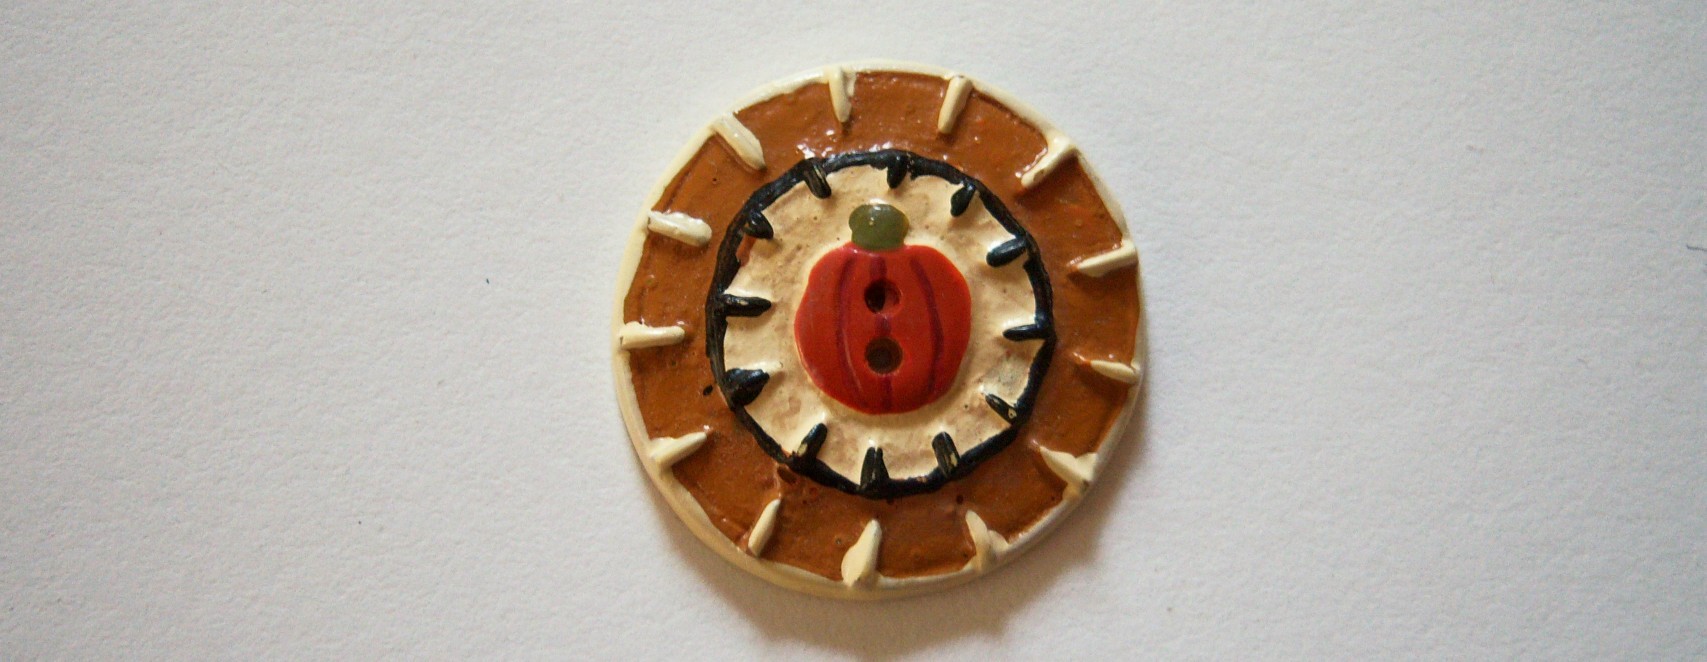 JHB round double border blanket stitched pumpkin center 7/8" 2 hole poly resin  button.